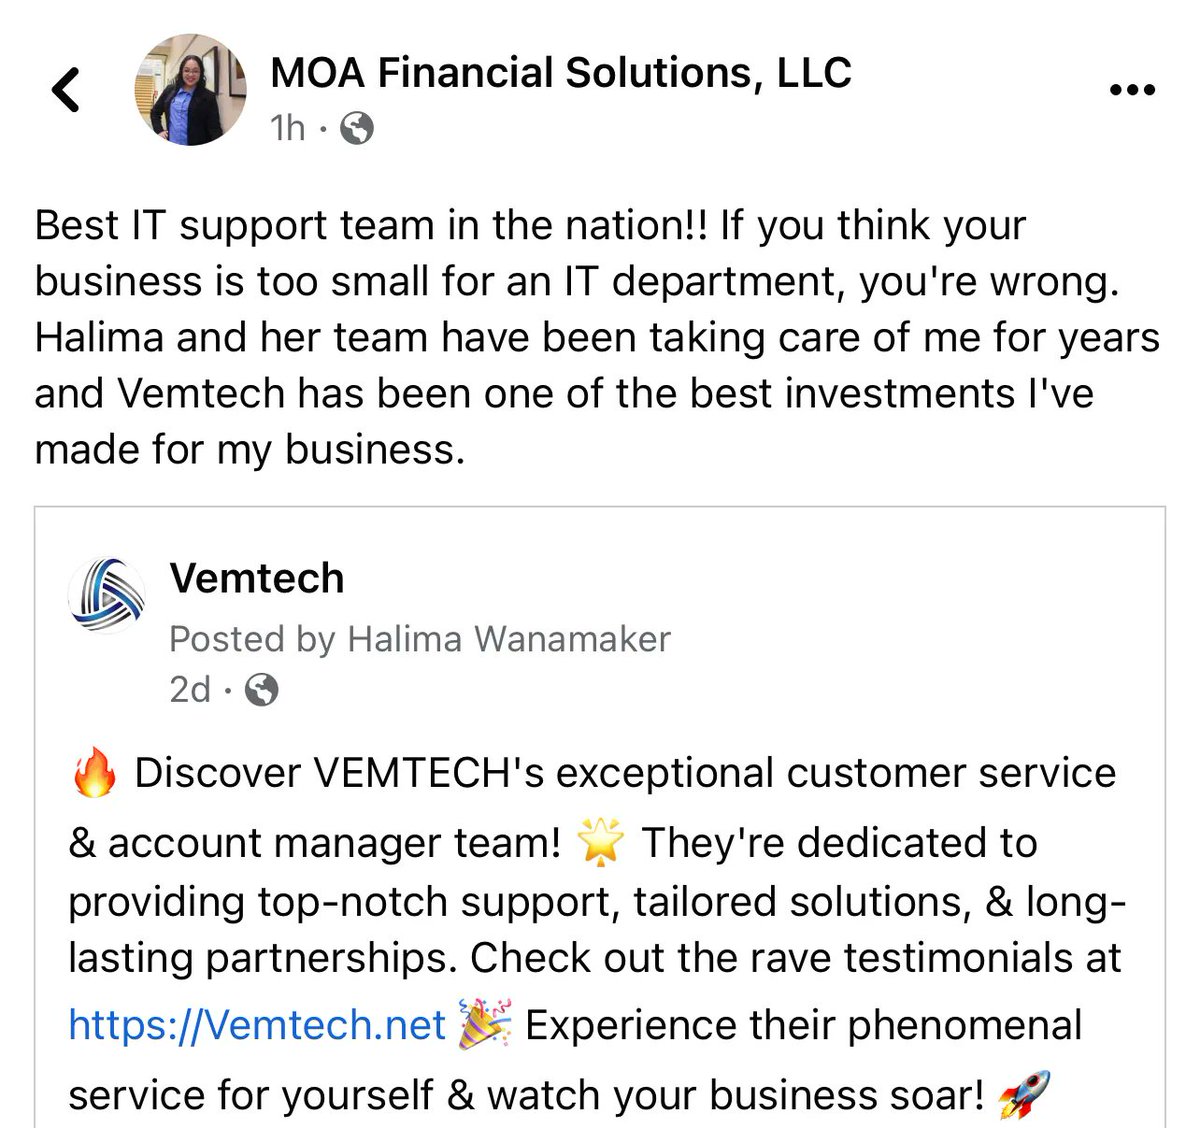 👇🏾The results of building long lasting relationships!

#VEMTECH #CustomerServiceExcellence #relationshipbuilding #results #AccountManagement #BusinessGrowth #MartinsburgWV #BerkeleyCountyWV #jeffersoncountywv #hagerstownmd #frederickmd #loudouncountyva #winchesterva